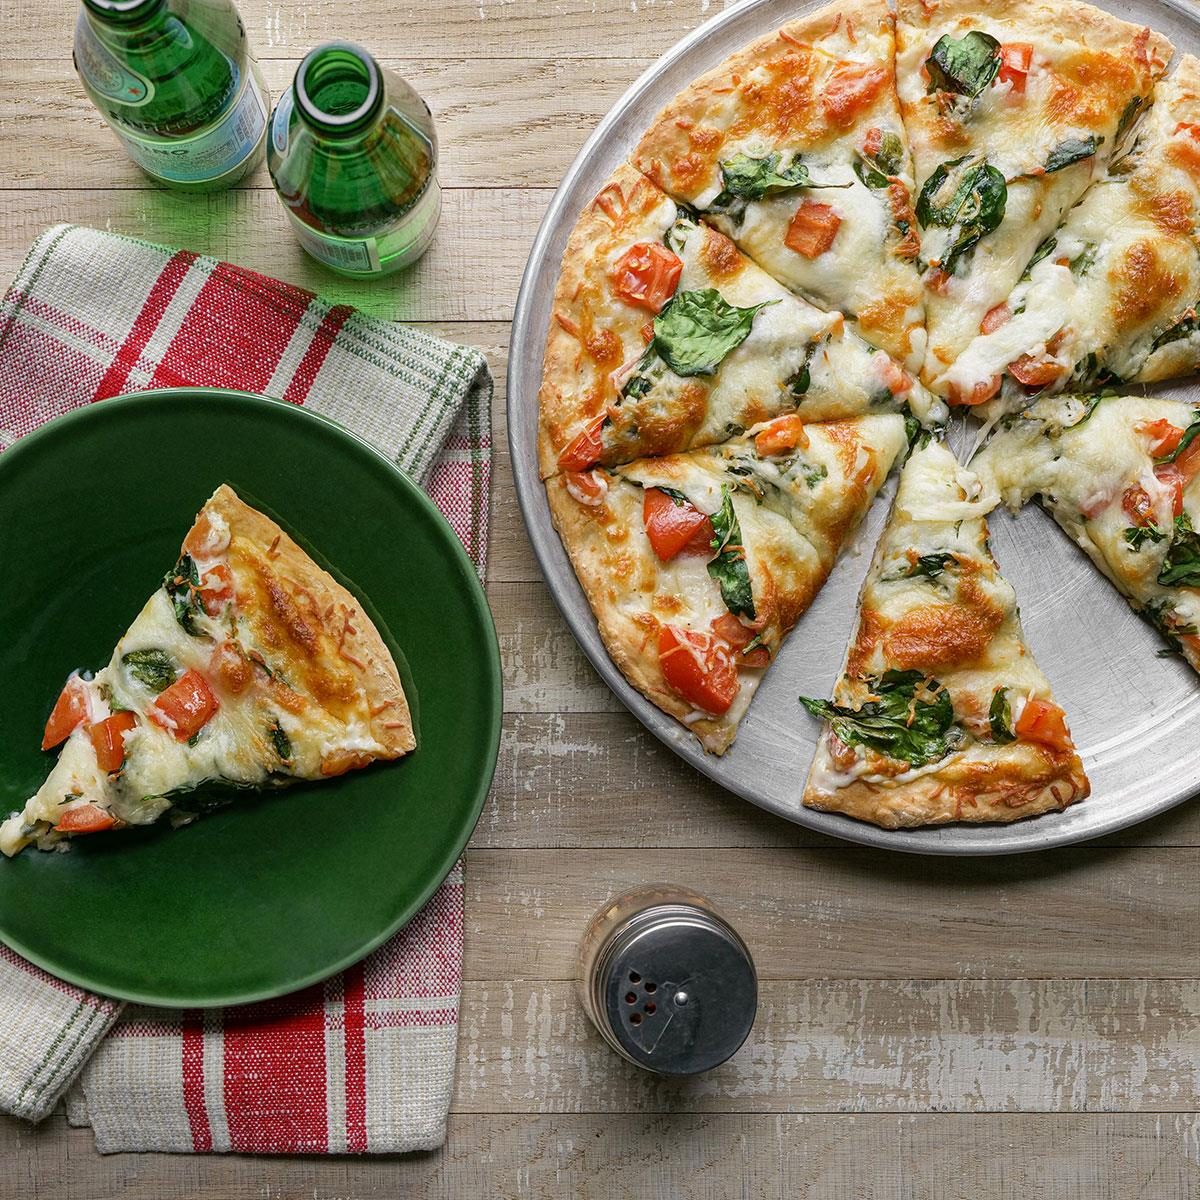 Spinach Pizza Exps Tohvp23 31784 Jm 12 19 Spinachpizza 1